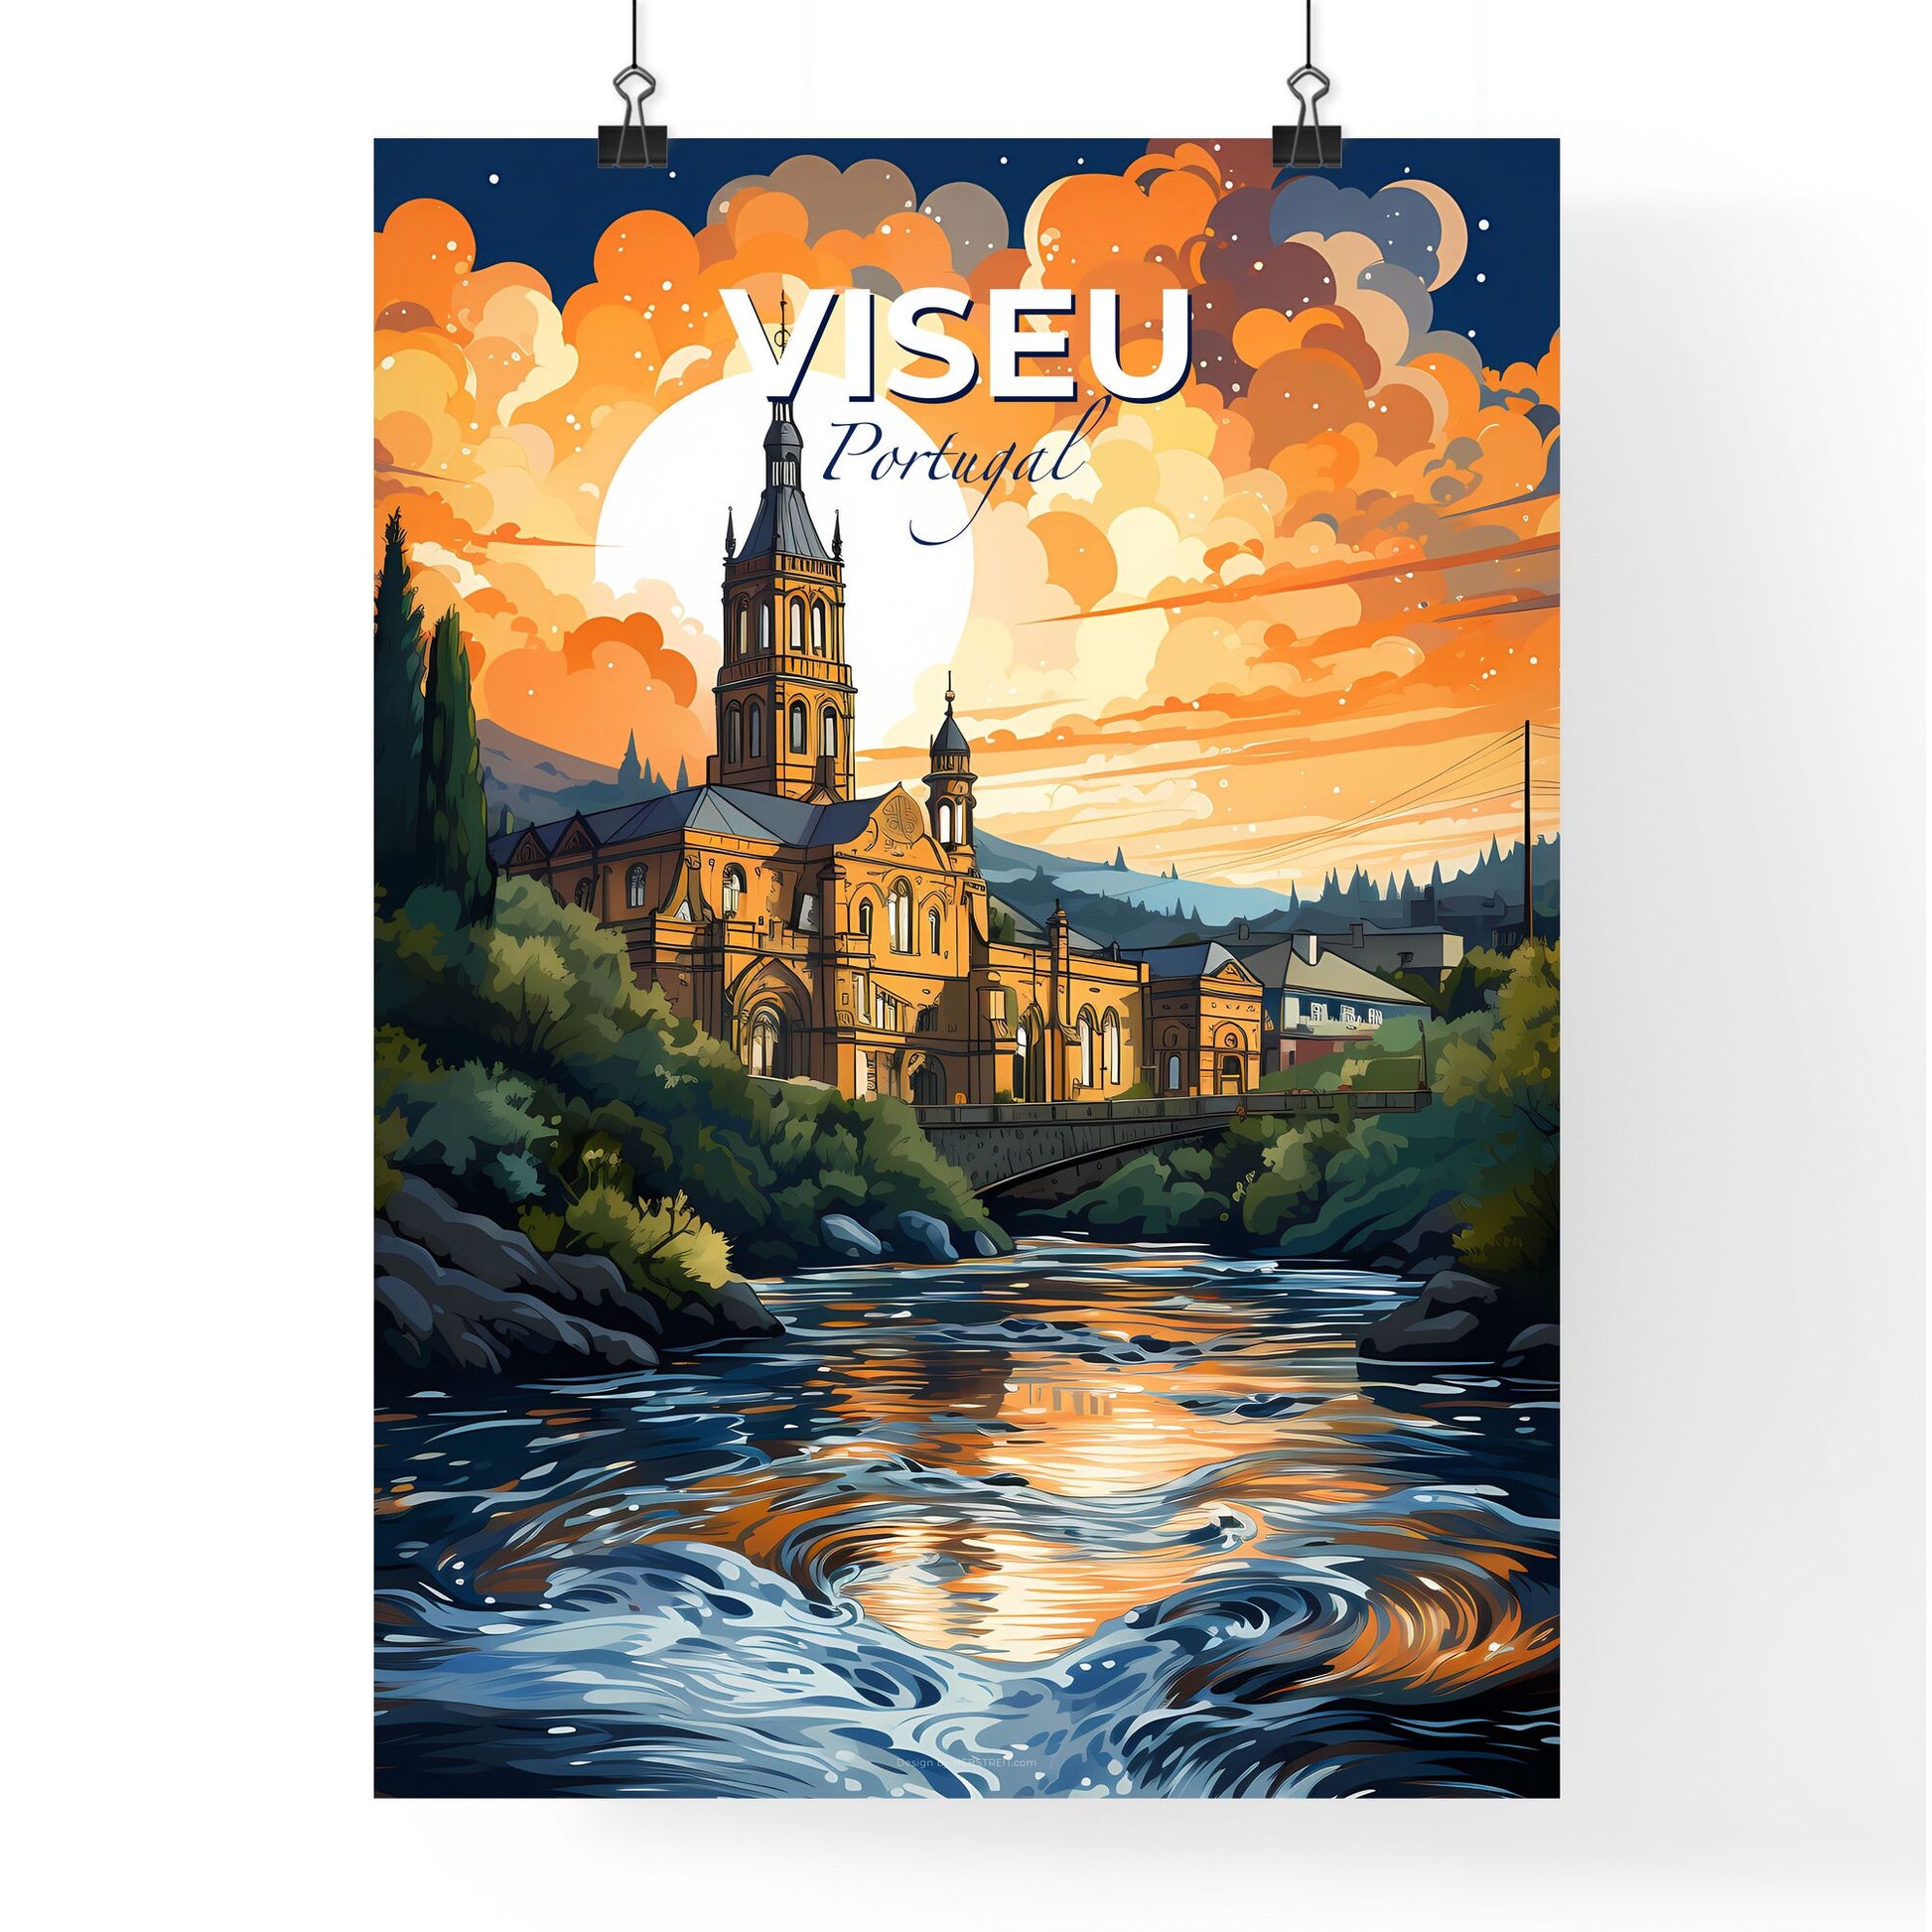 Viseu, Portugal, A Poster of a painting of a building with a river and trees Default Title